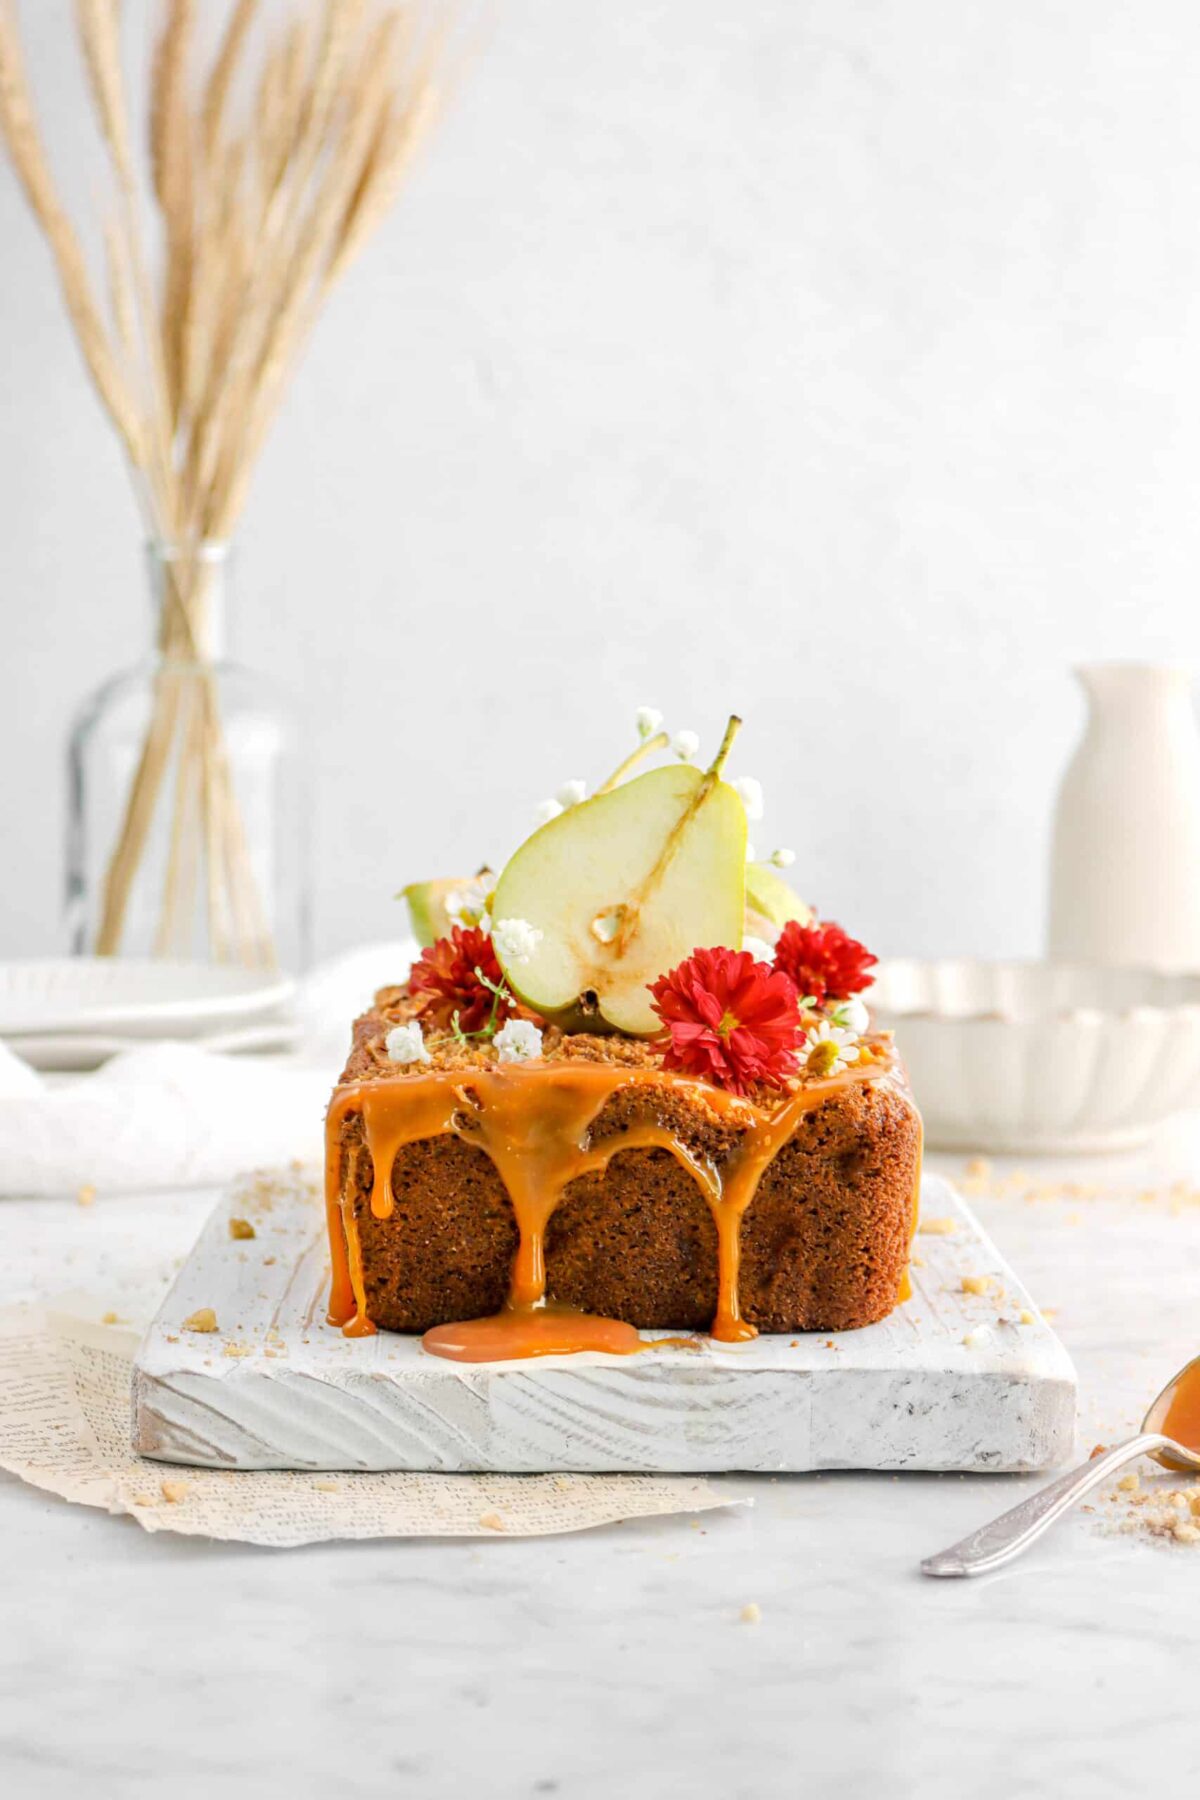 caramel dripping off pear loaf with flowers and sliced pear on top